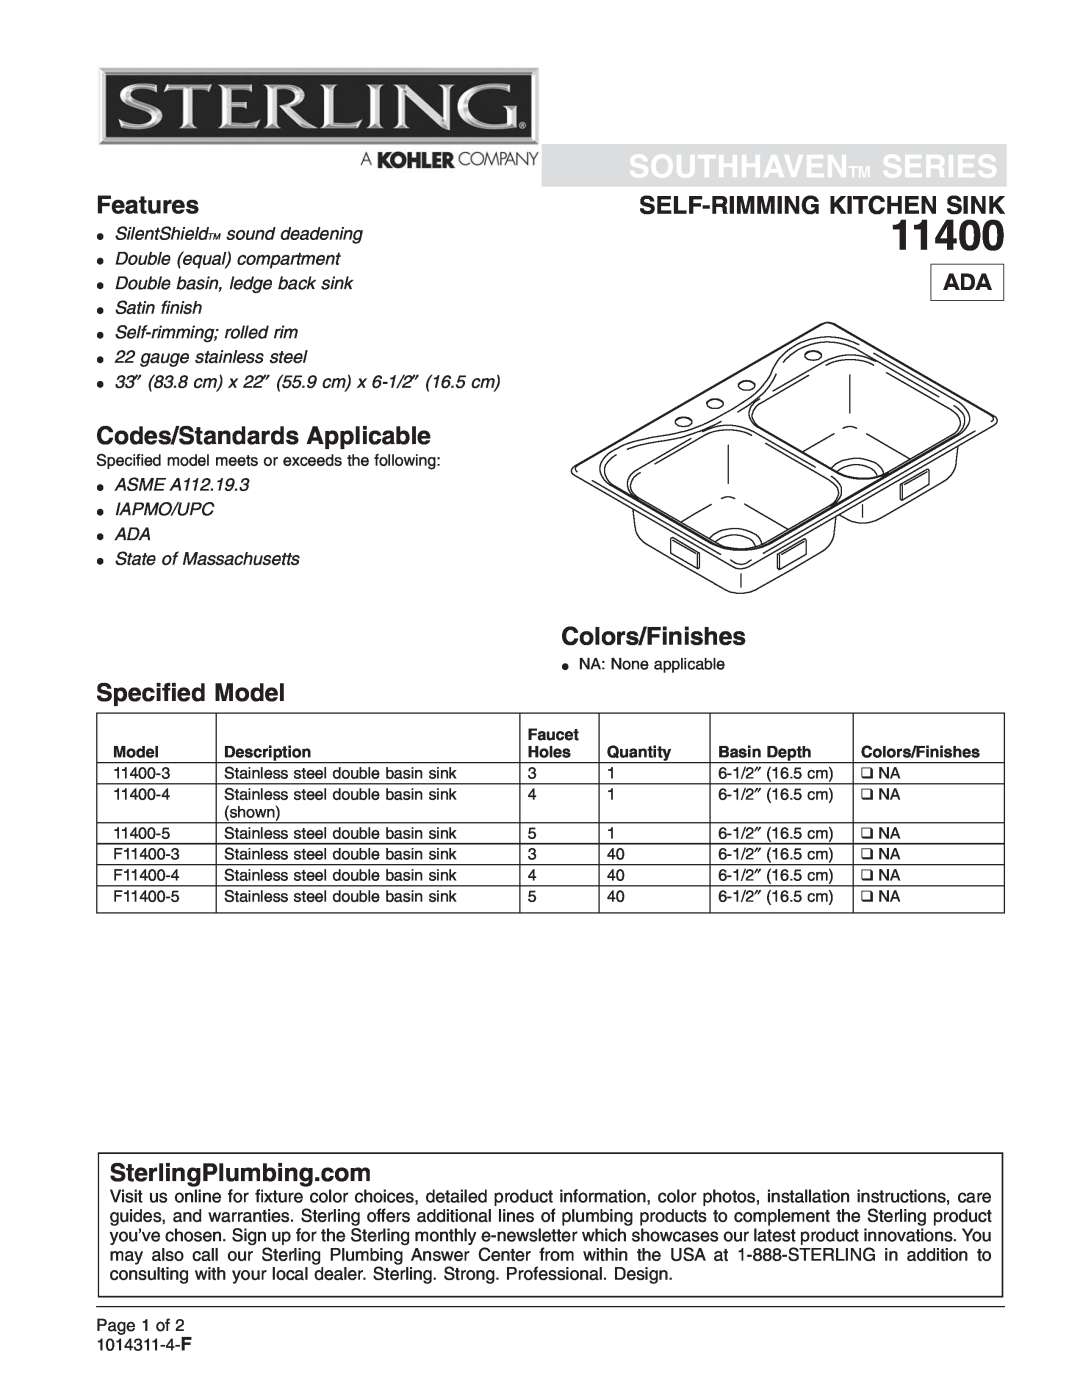 Sterling Plumbing 11400 installation instructions Southhaventm Series, Features, Self-Rimmingkitchen Sink, Colors/Finishes 